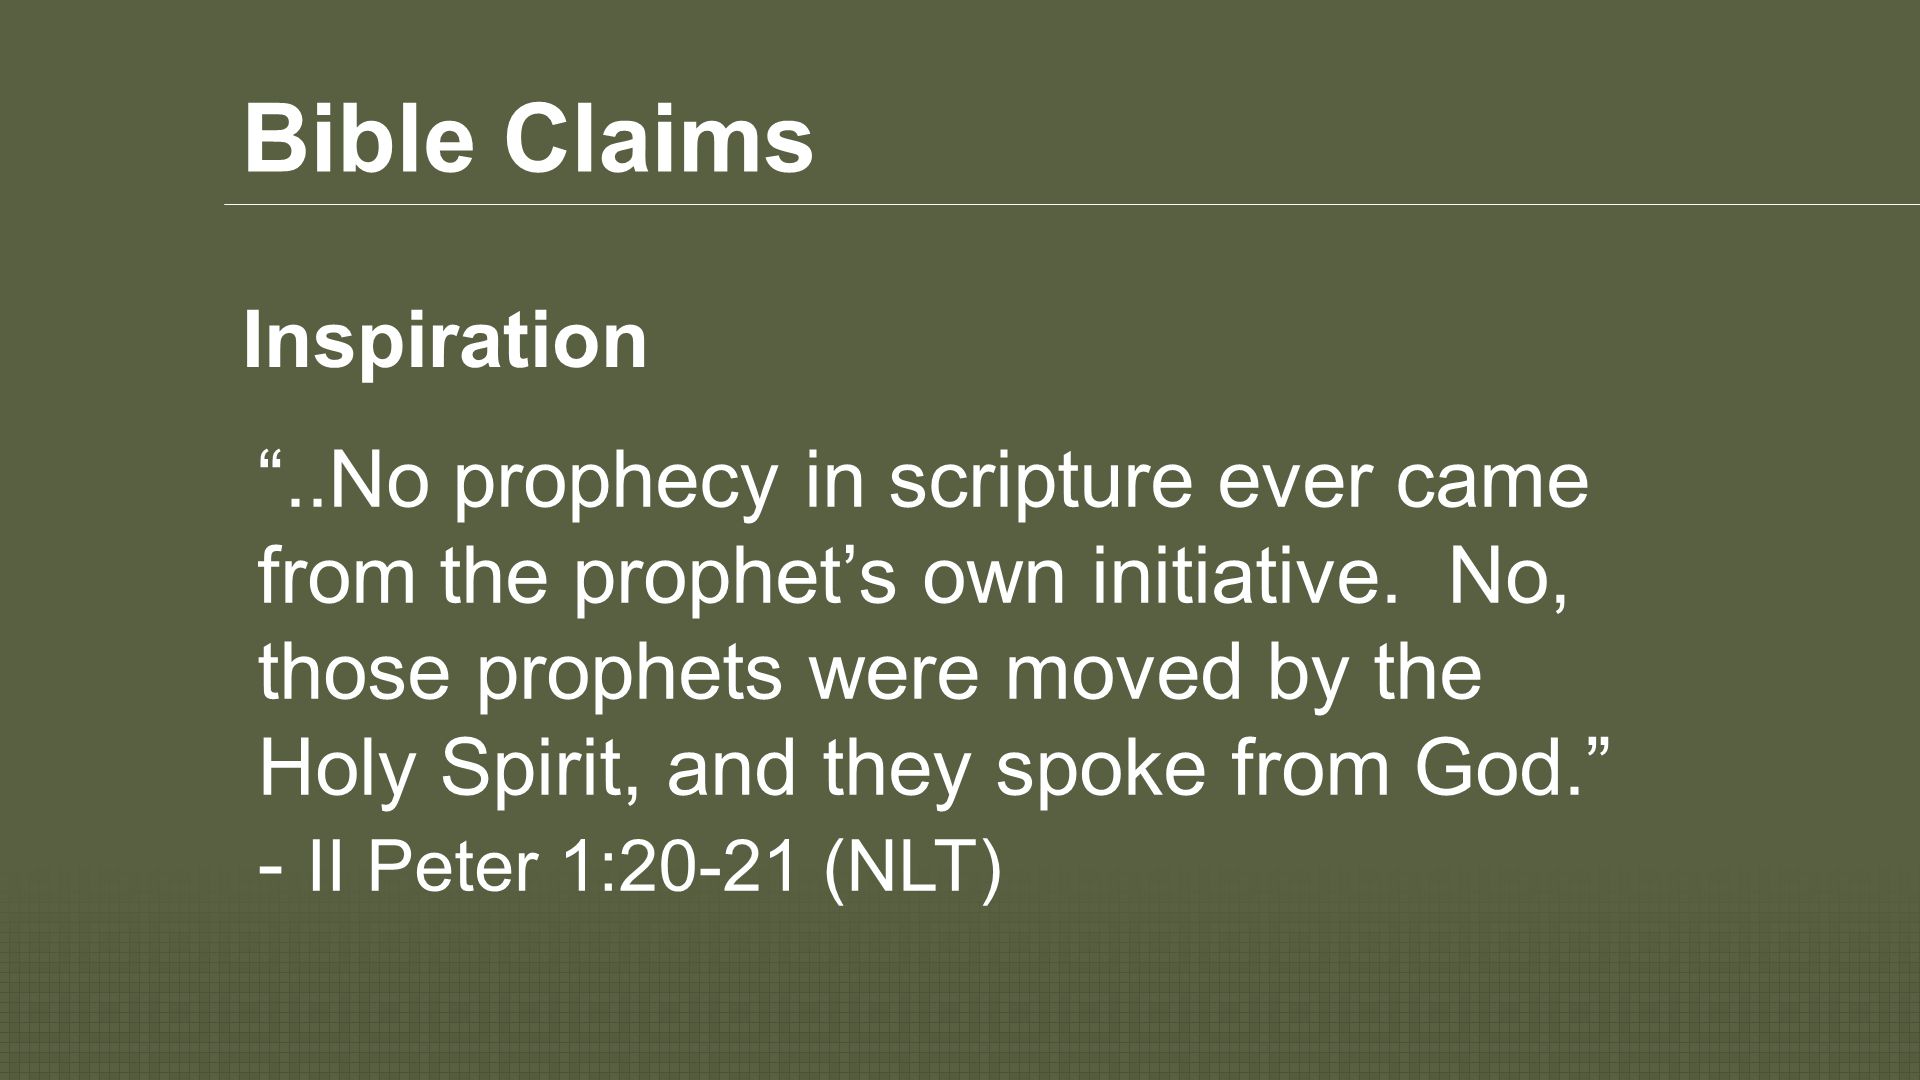 Bible Claims ..No prophecy in scripture ever came from the prophet’s own initiative.